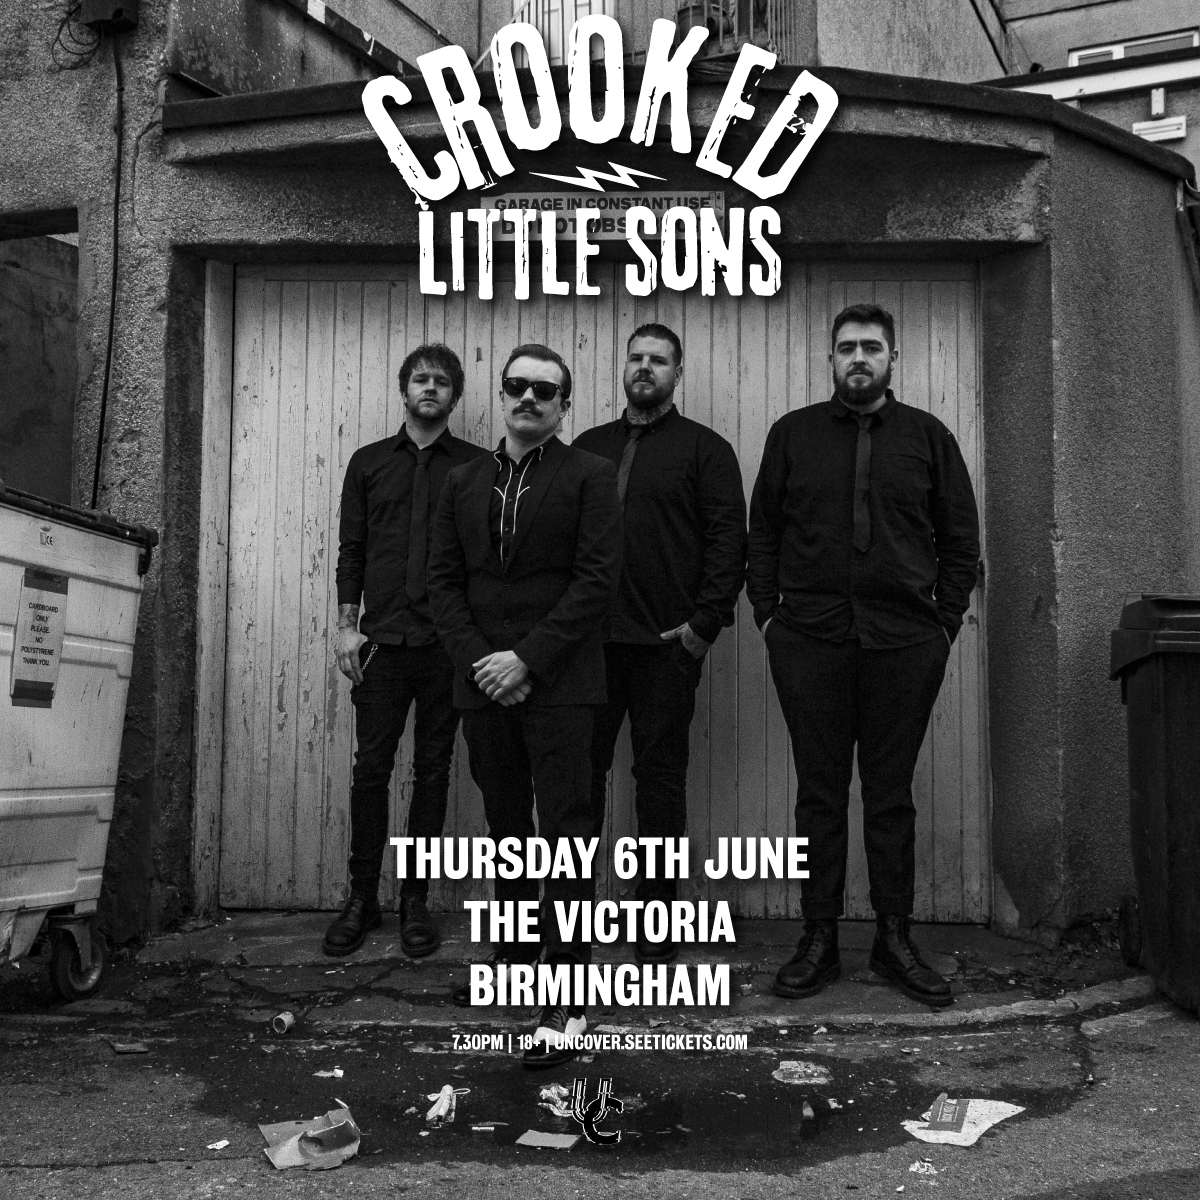 ONE MONTH TO GO 💙 Punk n' roll purveyors @CrookedLSons headline @TheVictoria, Birmingham, on Thursday, 6th June 💥 Tickets on sale now: bit.ly/44pa4Zr